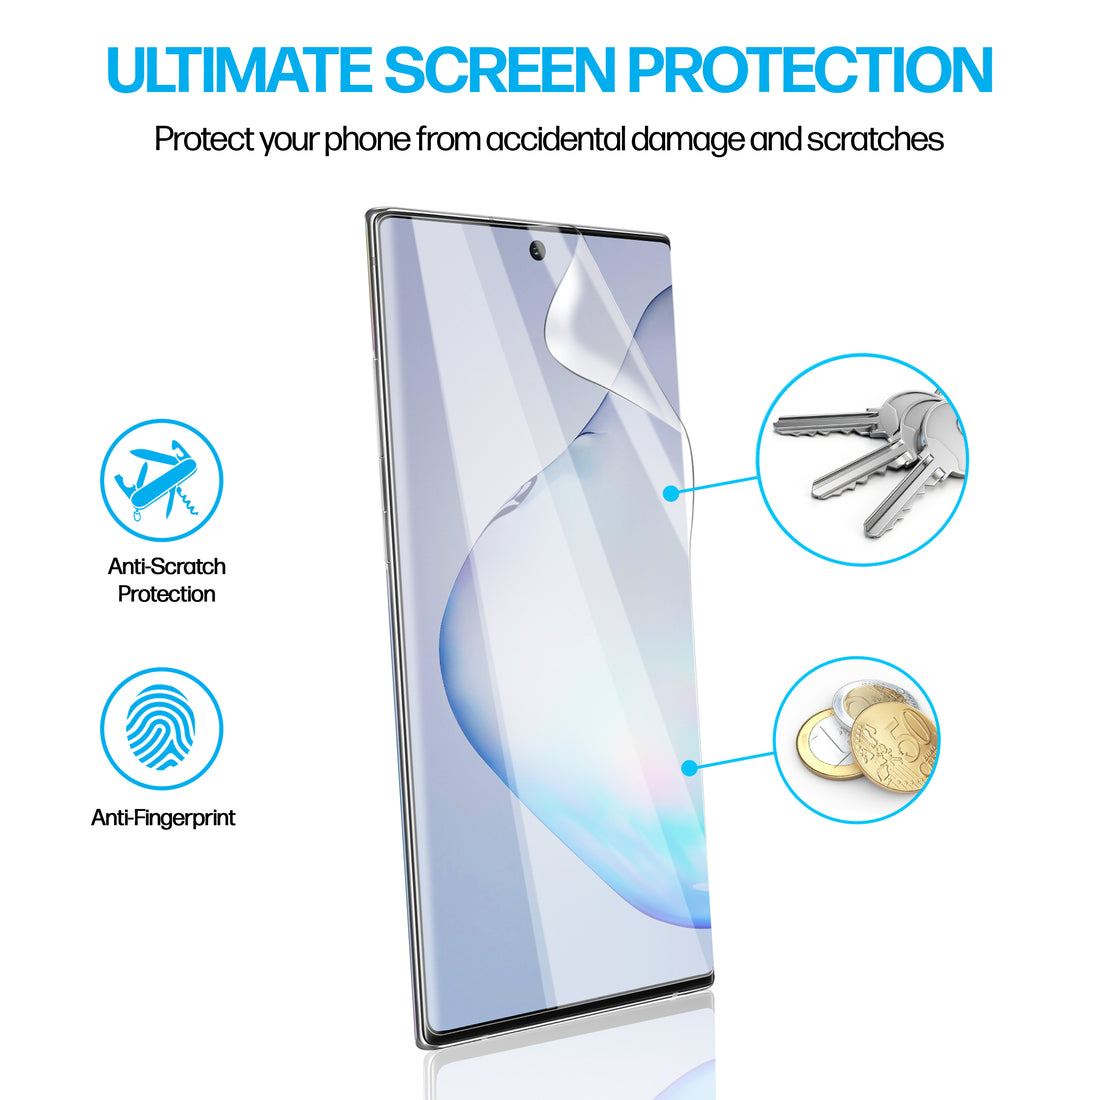 Samsung Galaxy Note 10 Plus Anti-Scratch Screen Protector Film [2-Pack] Preview #7